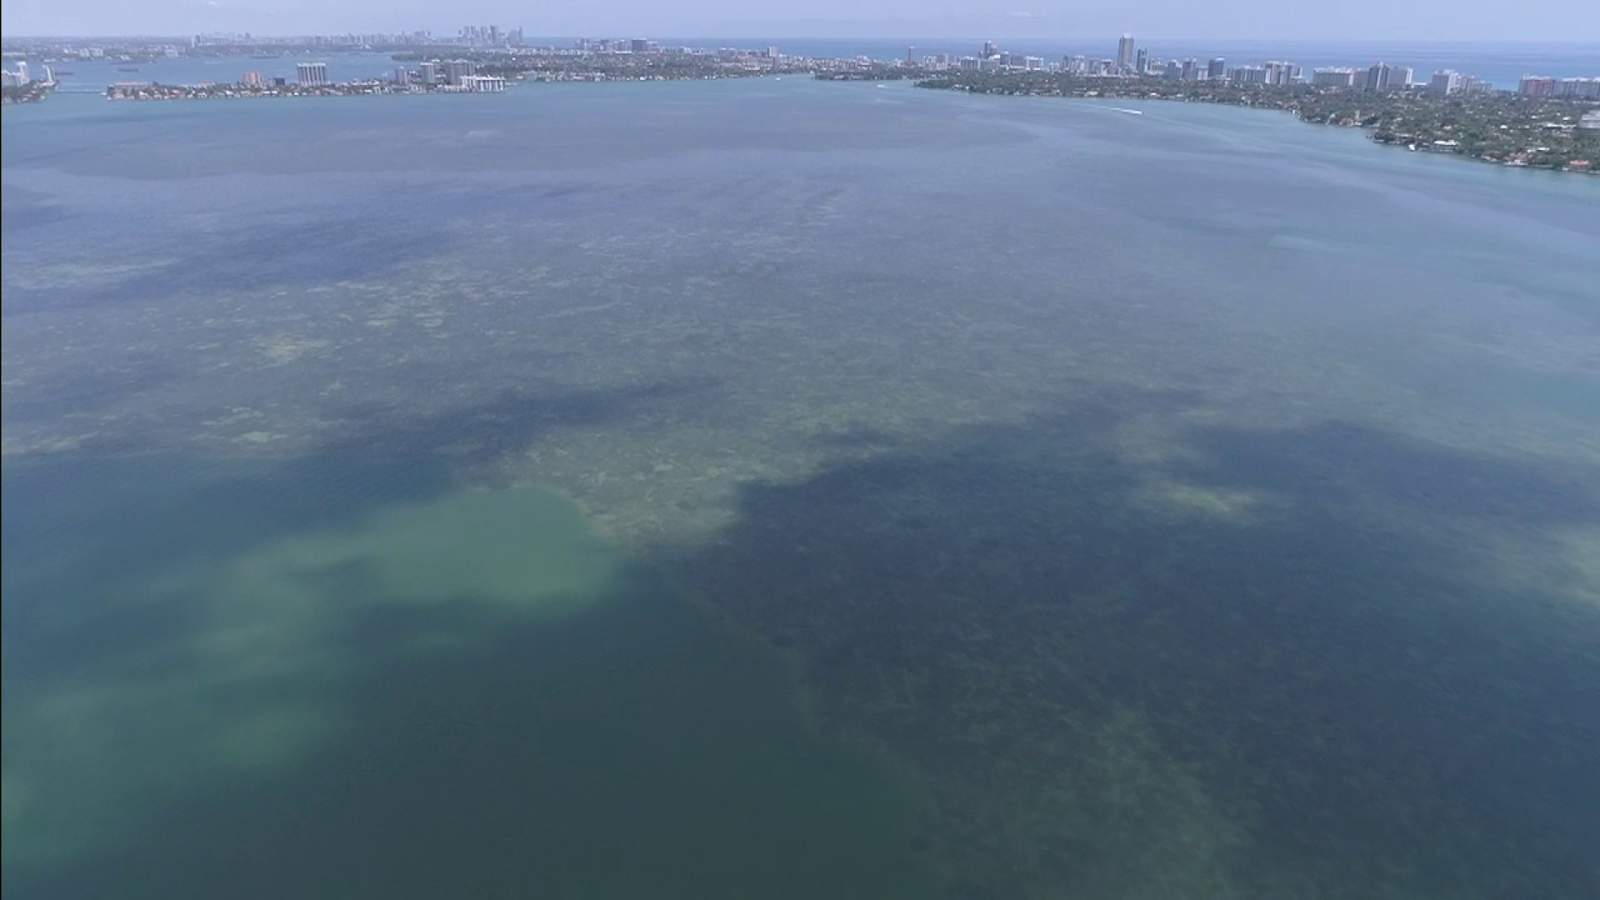 New report has same old findings on how to save Biscayne Bay